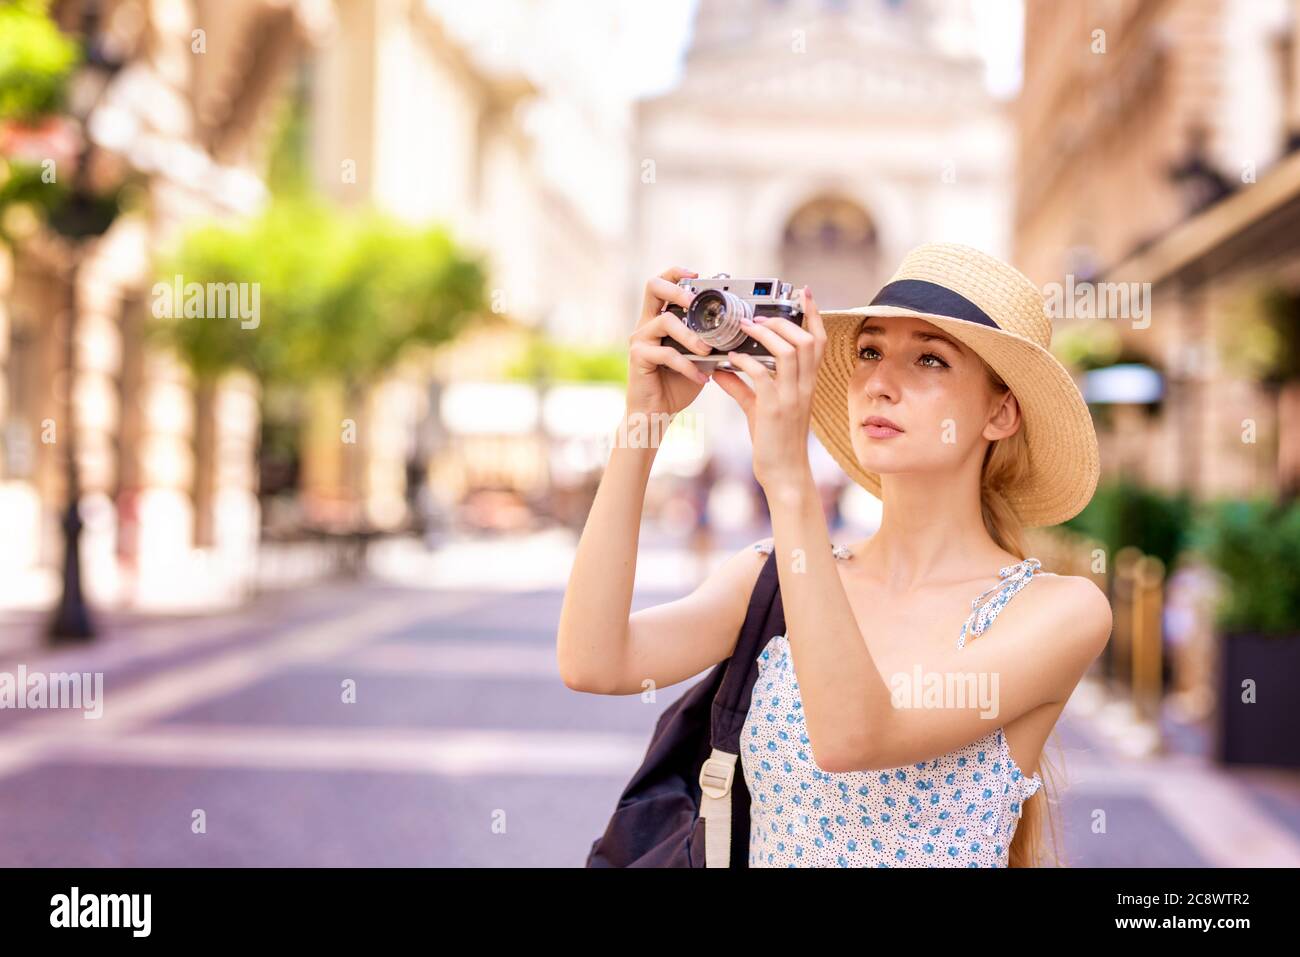 Shot of young woman taking pictures with vintage camera while ...